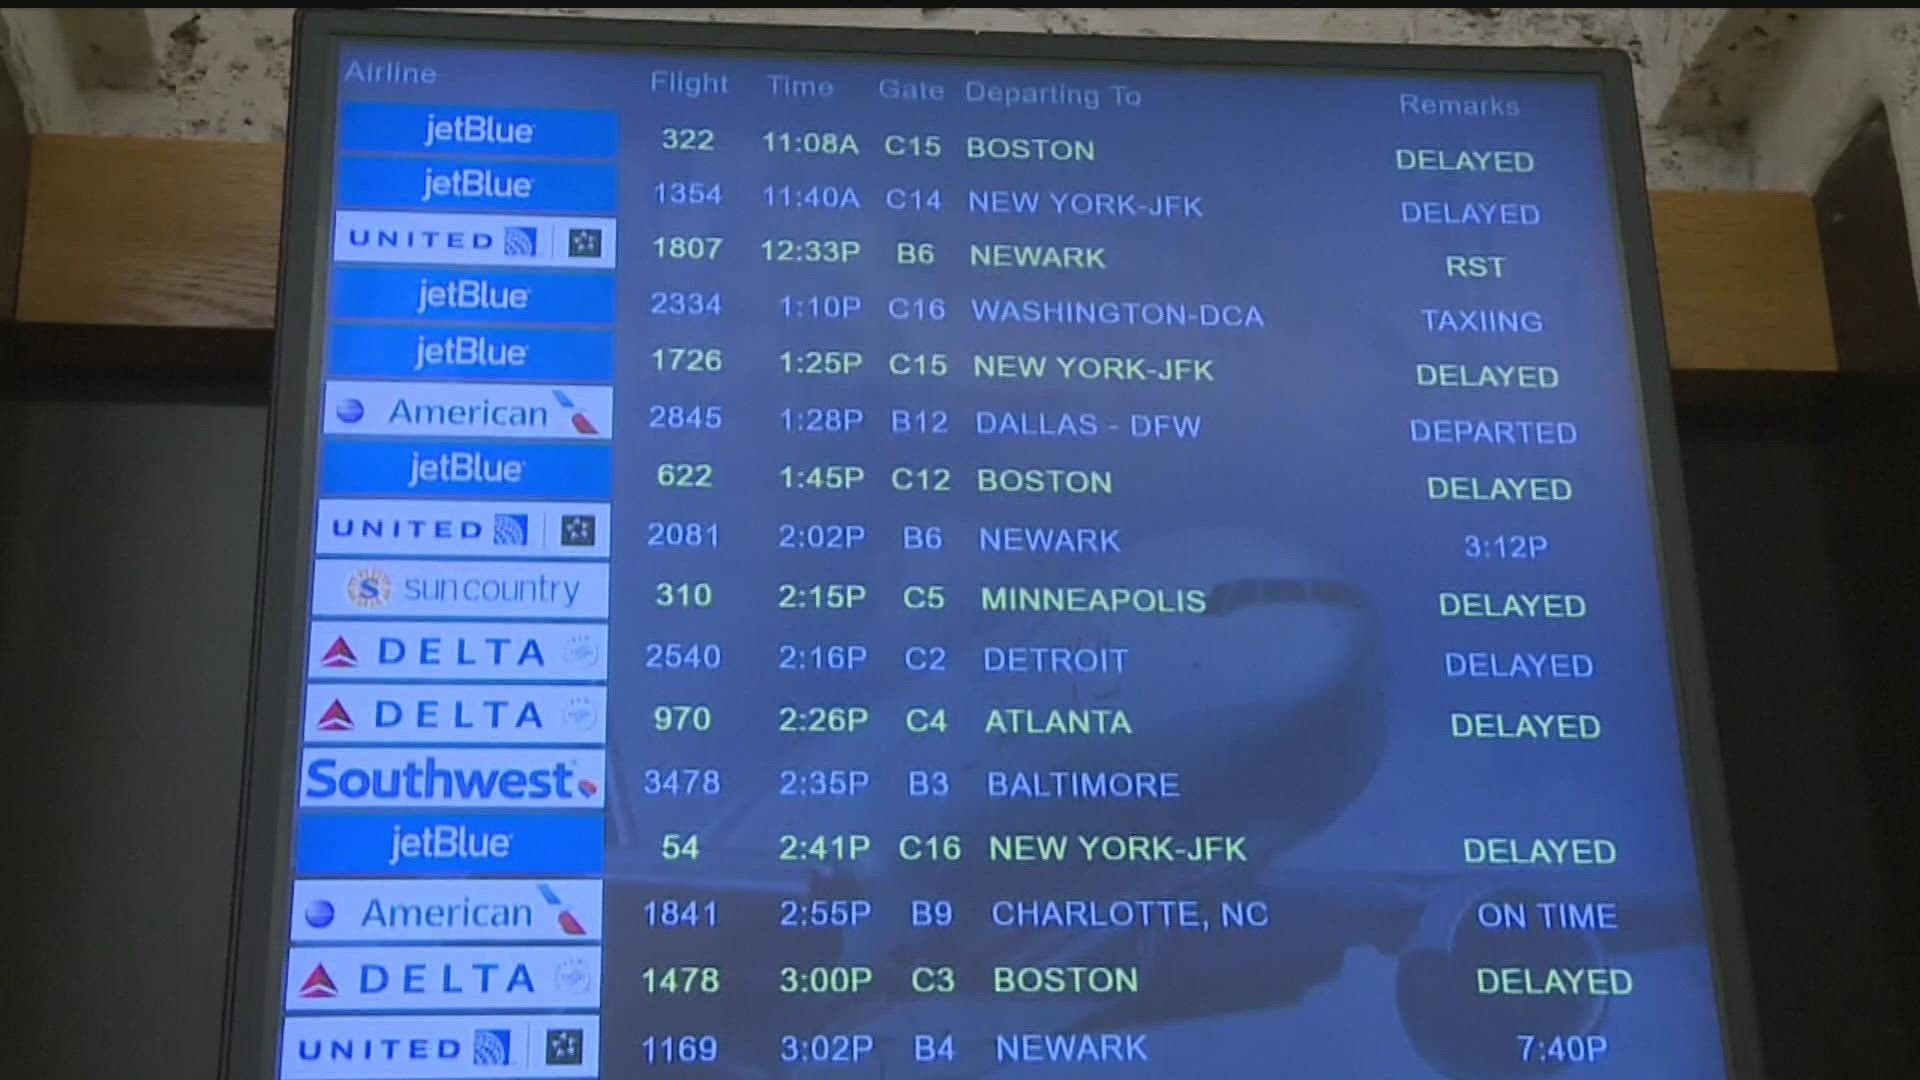 A nationwide system outage has paused takeoffs at every airport in America, including delays and cancelations at MSP International Airport.